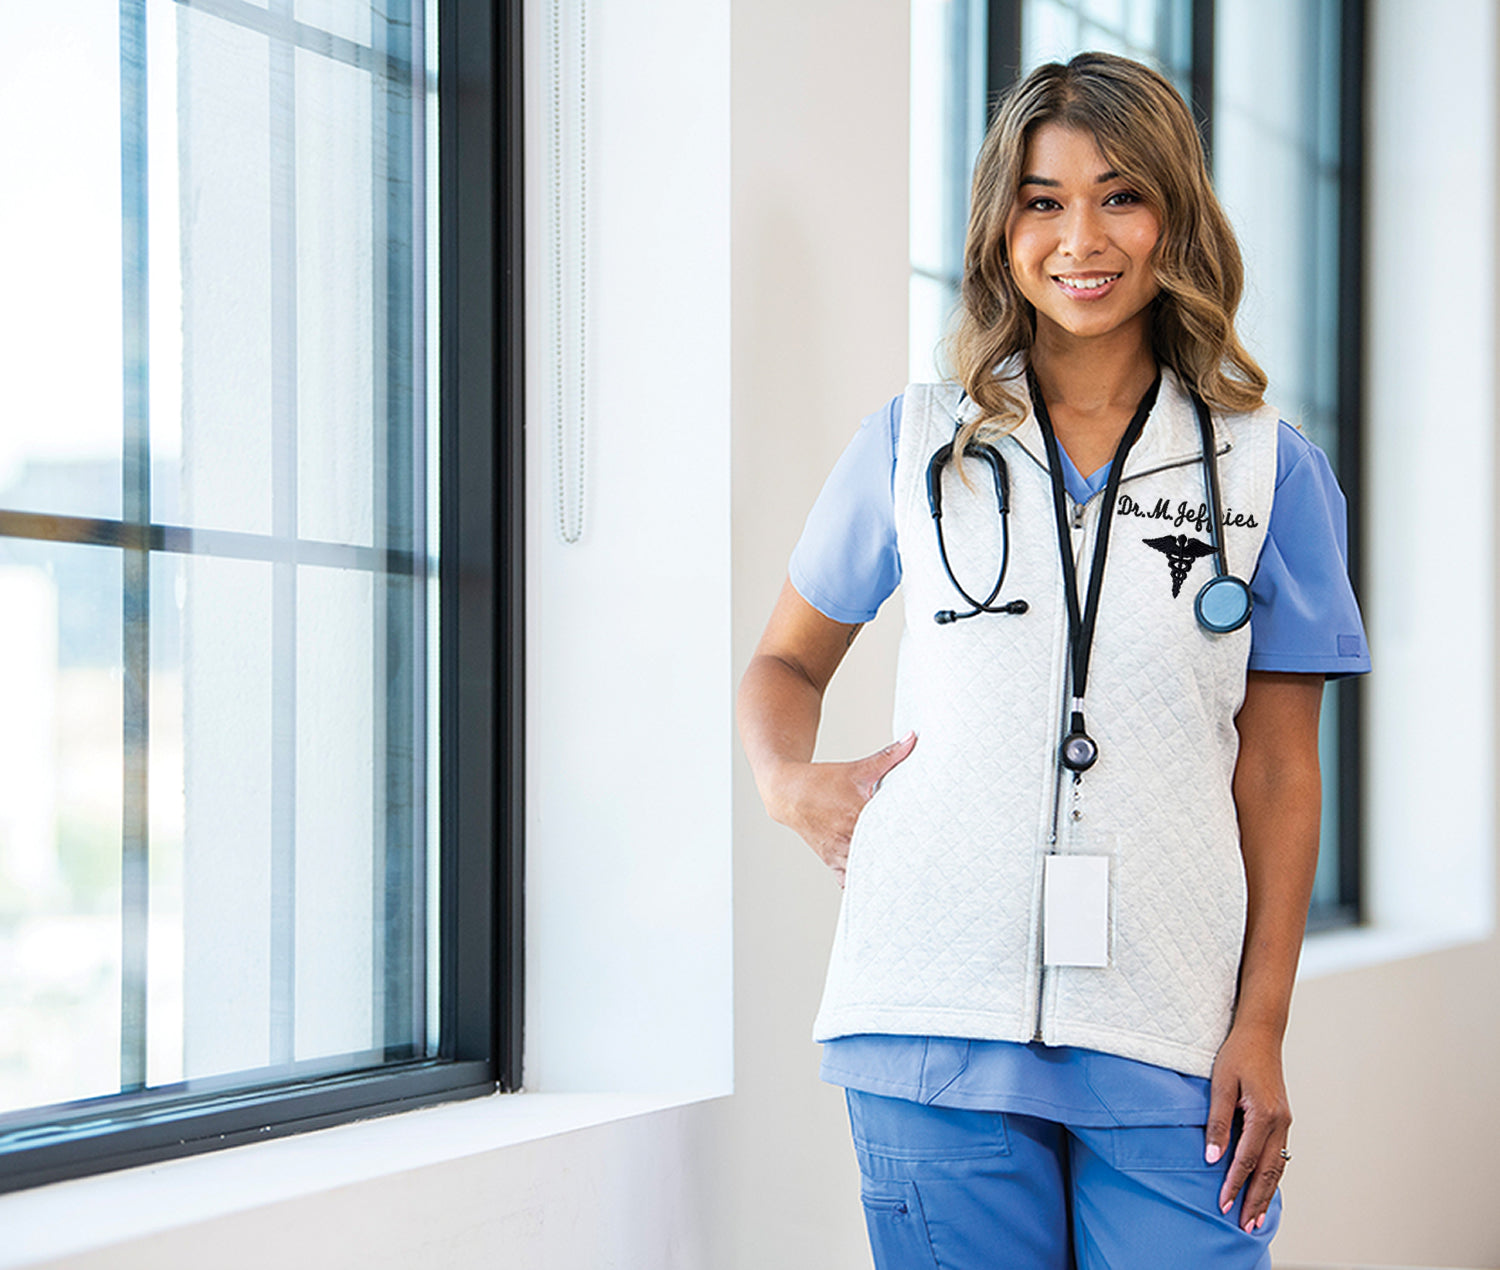 Personalized Jackets for Nurses and Doctors